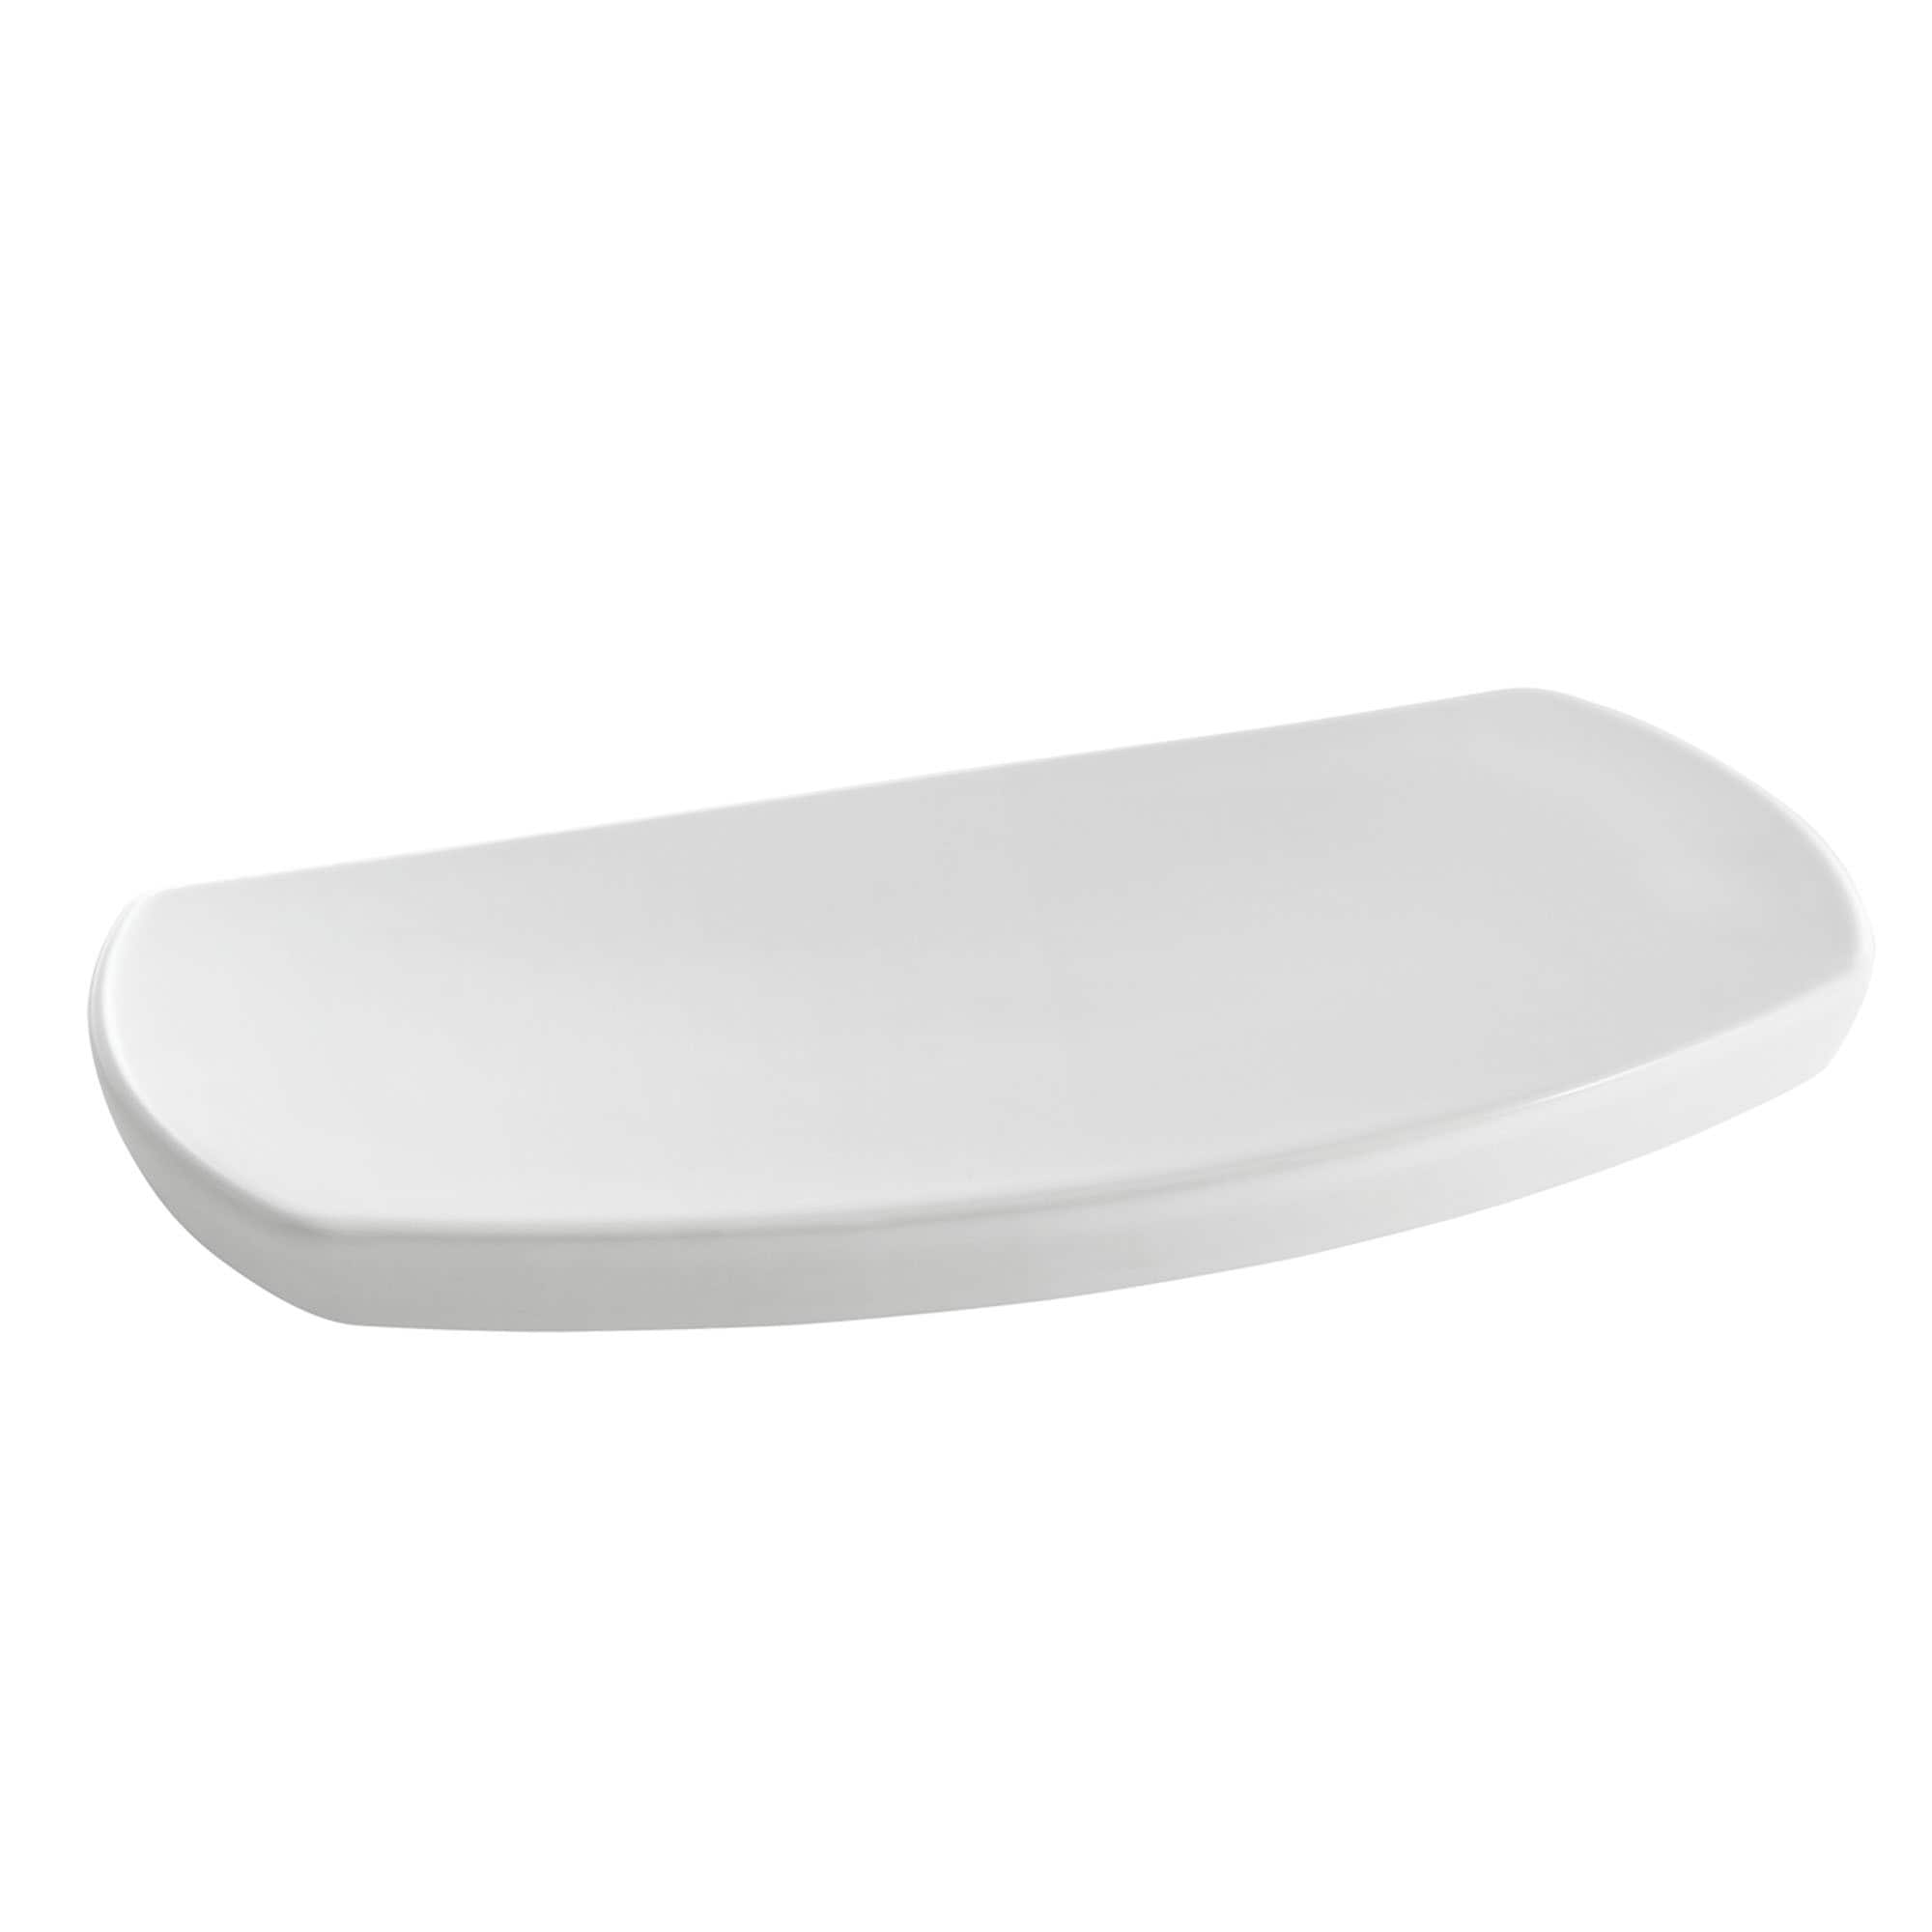 american-standard-edgemere-toilet-tank-lids-at-lowes